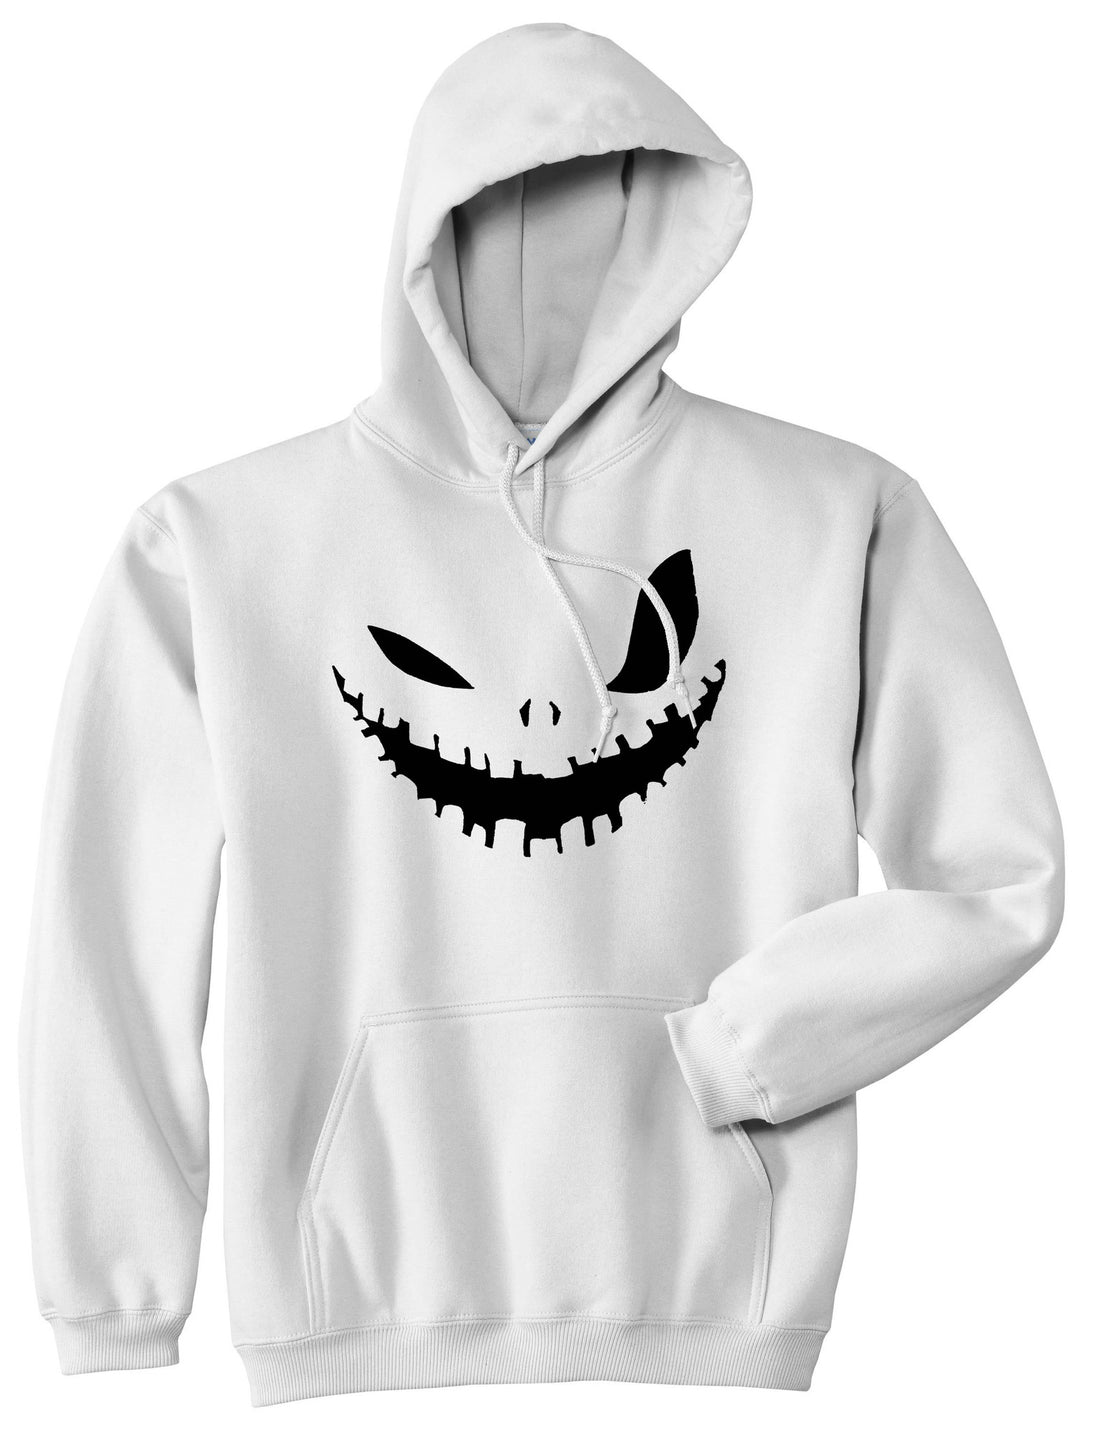 Scary Jack-o-lantern Face Halloween Pullover Hoodie